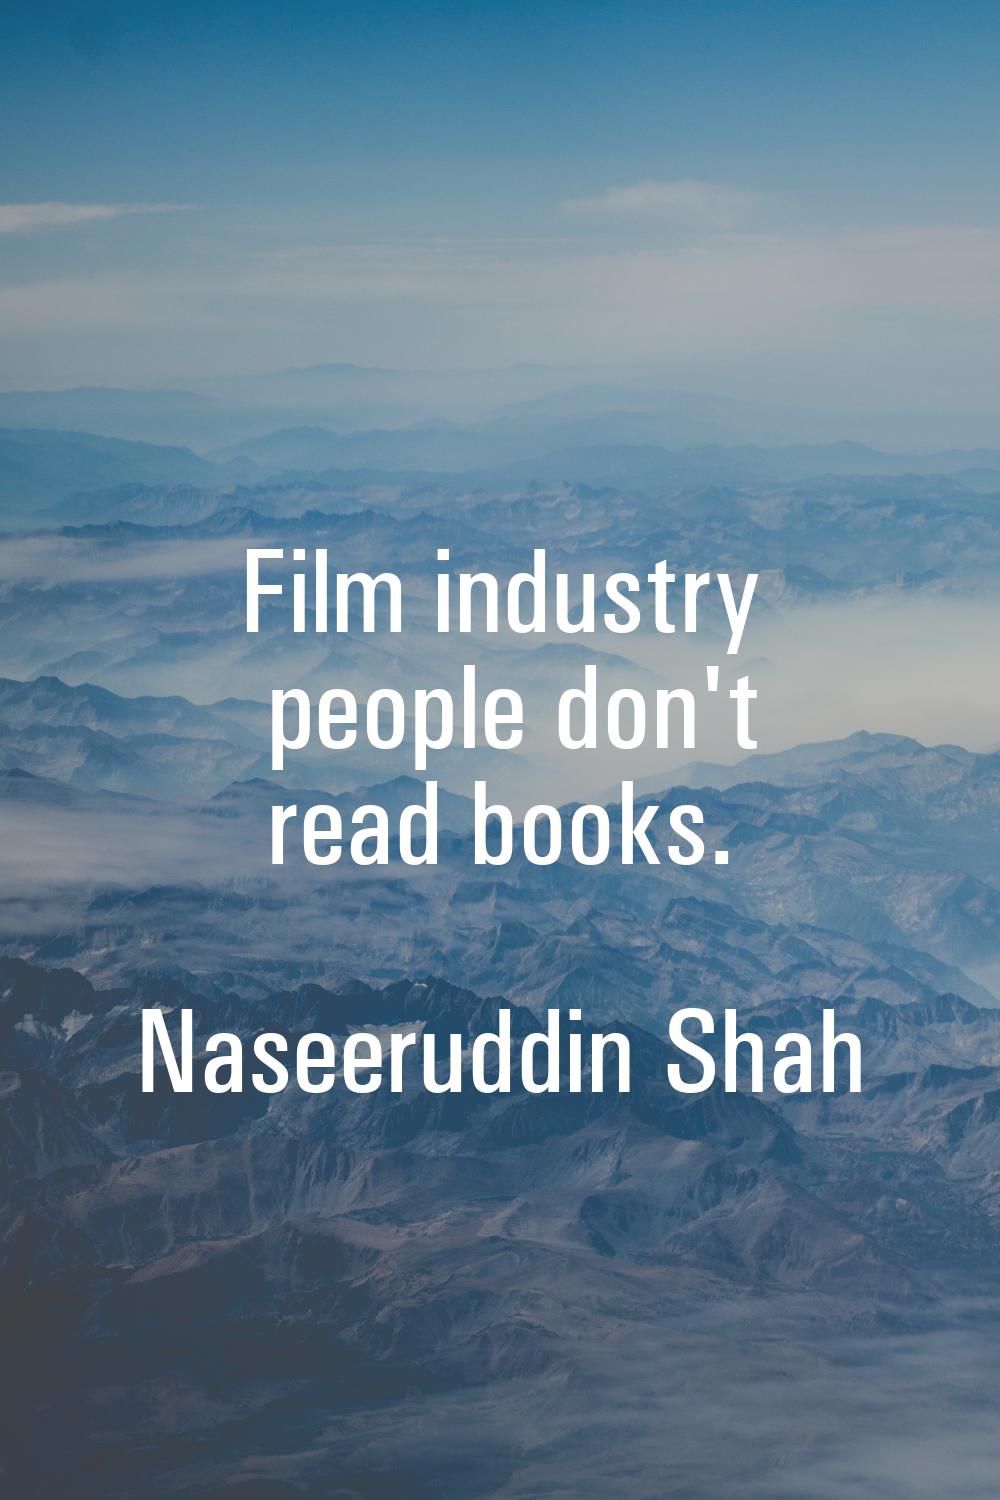 Film industry people don't read books.